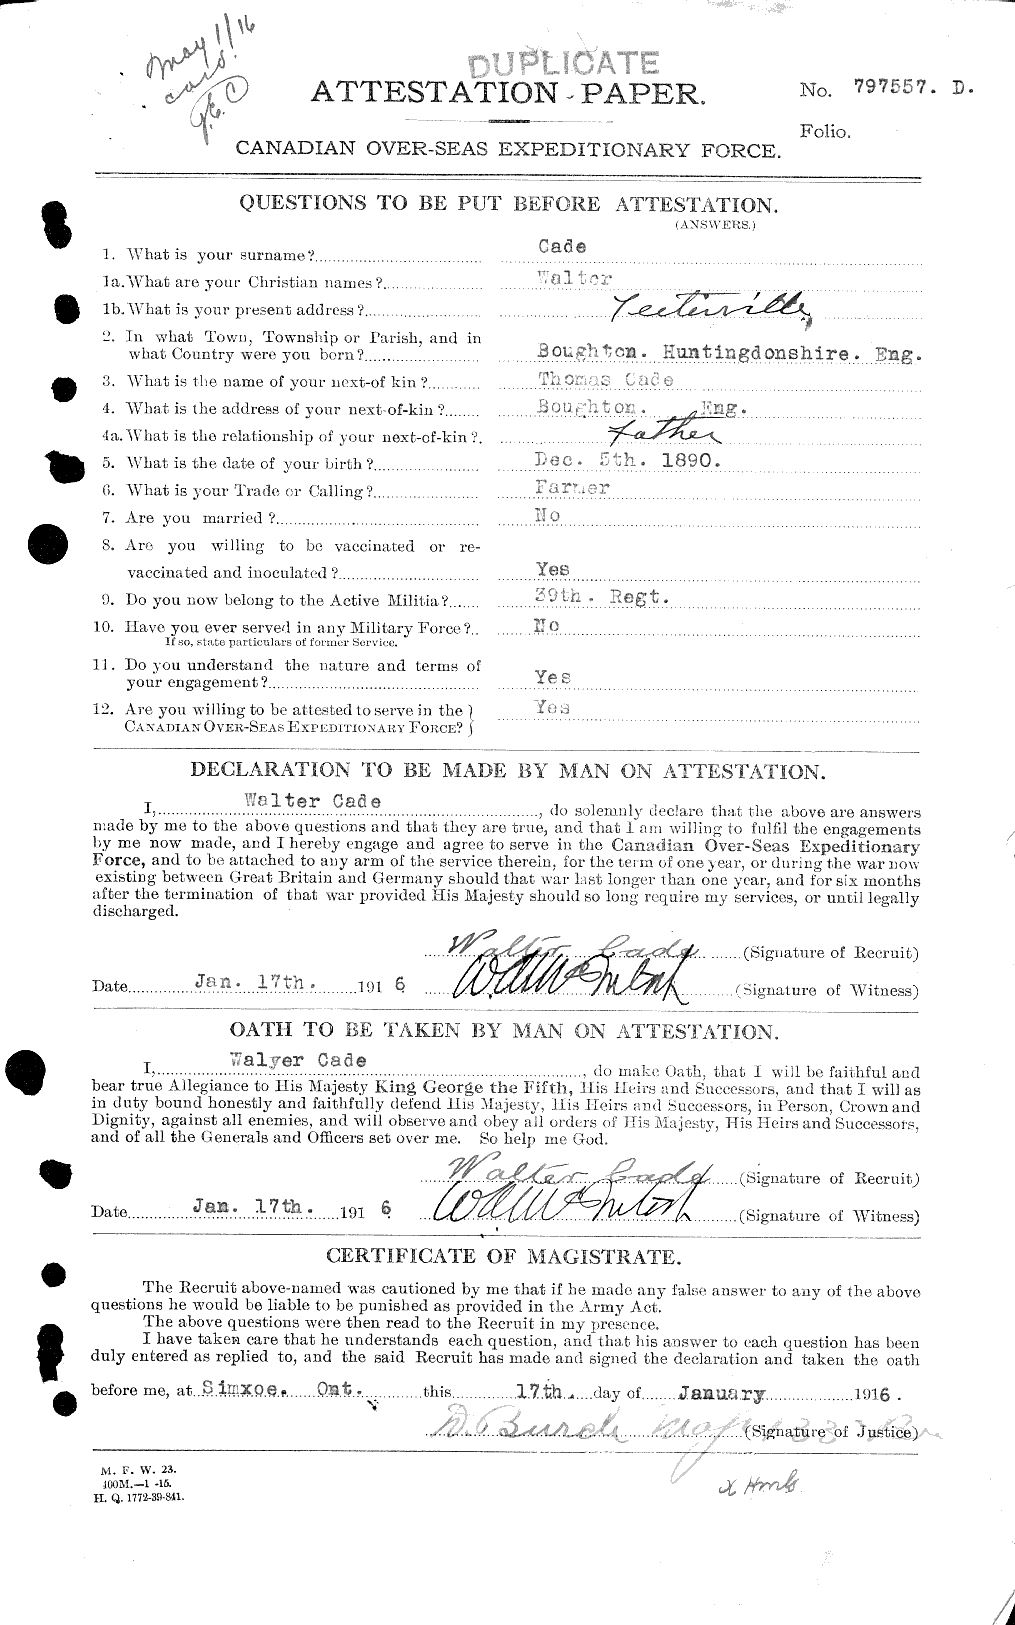 Personnel Records of the First World War - CEF 000113a